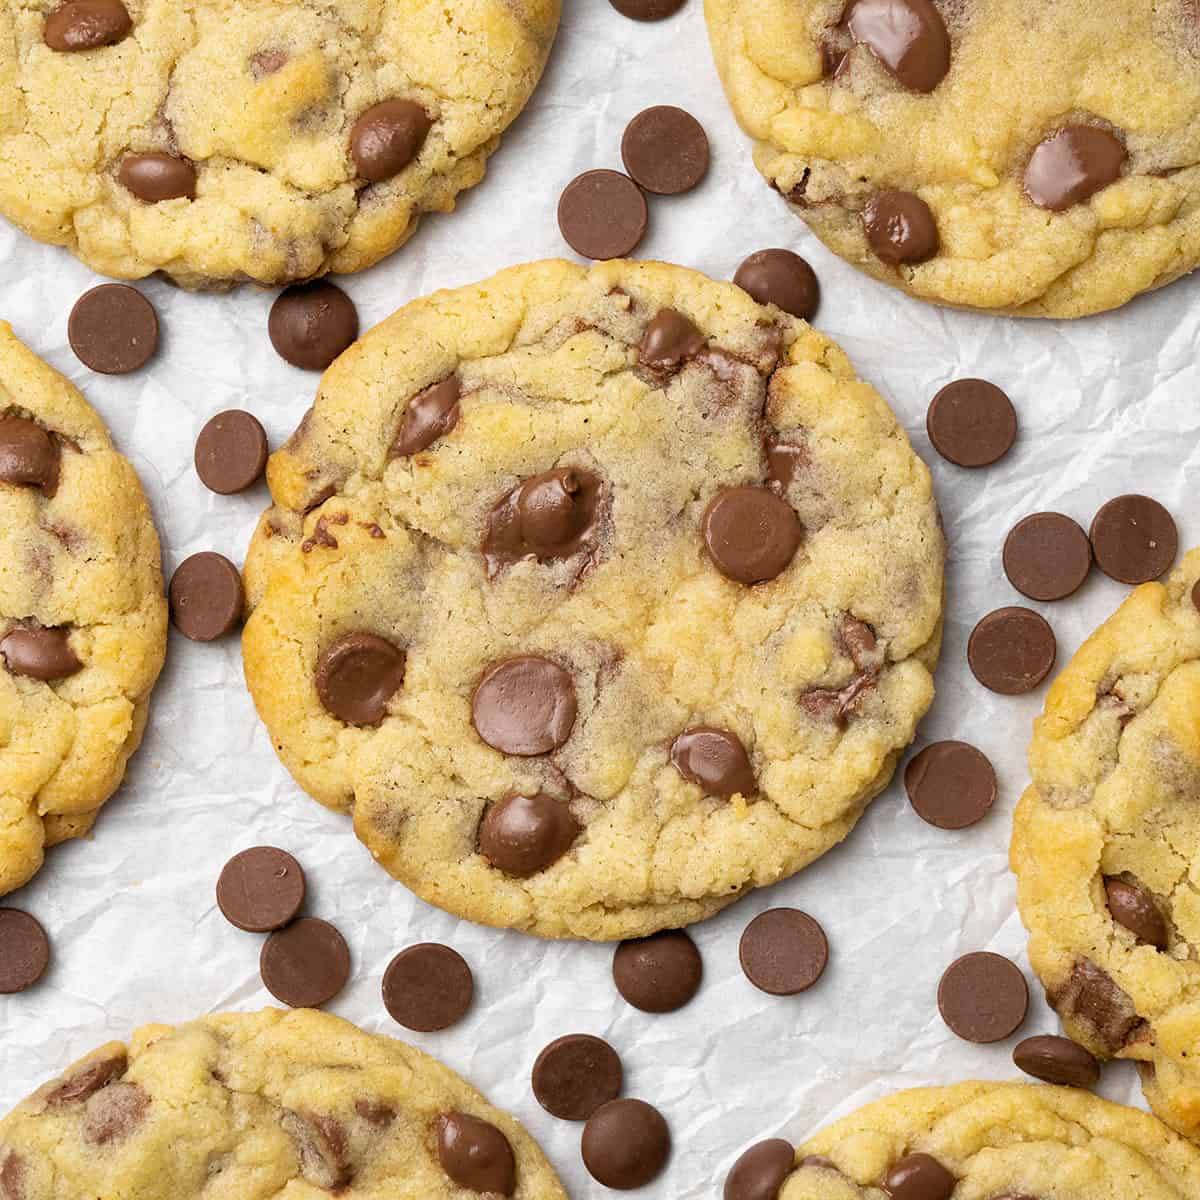 22 Pastry Shop Cookies That Any Beginner Baker Can Make